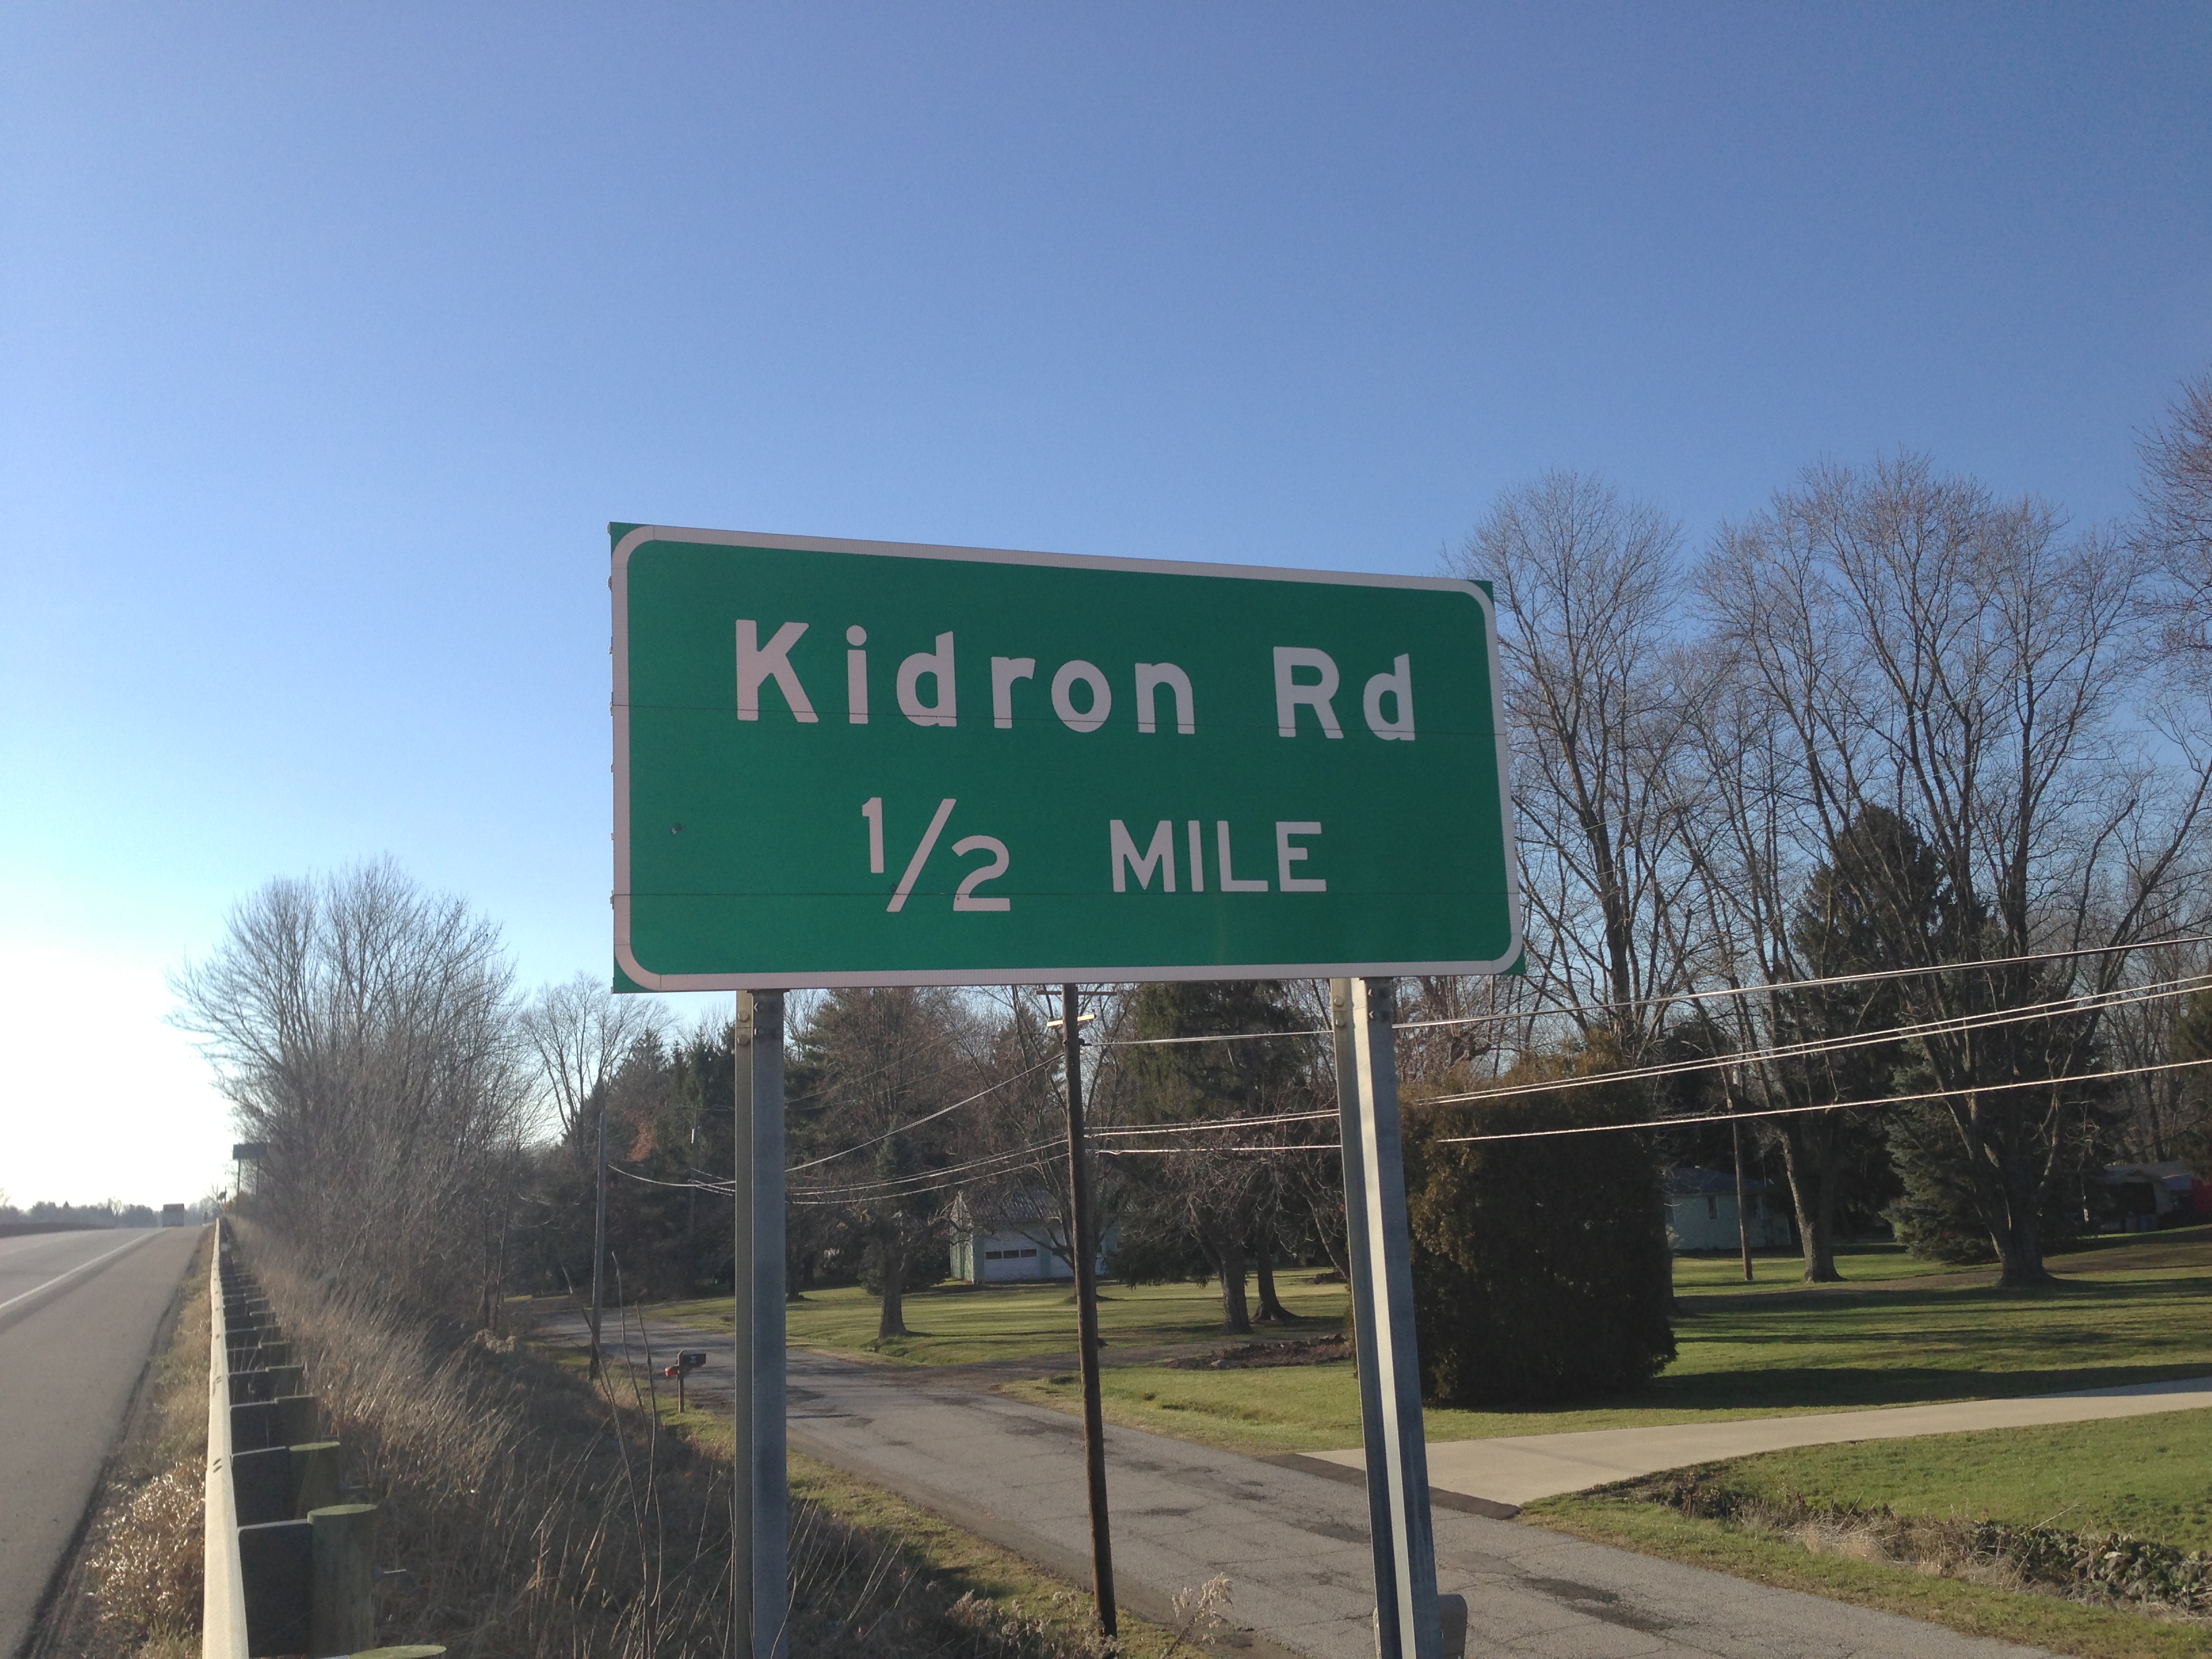 Just after you pass Kurzen Road, youll see this, and youll know youre just fine!